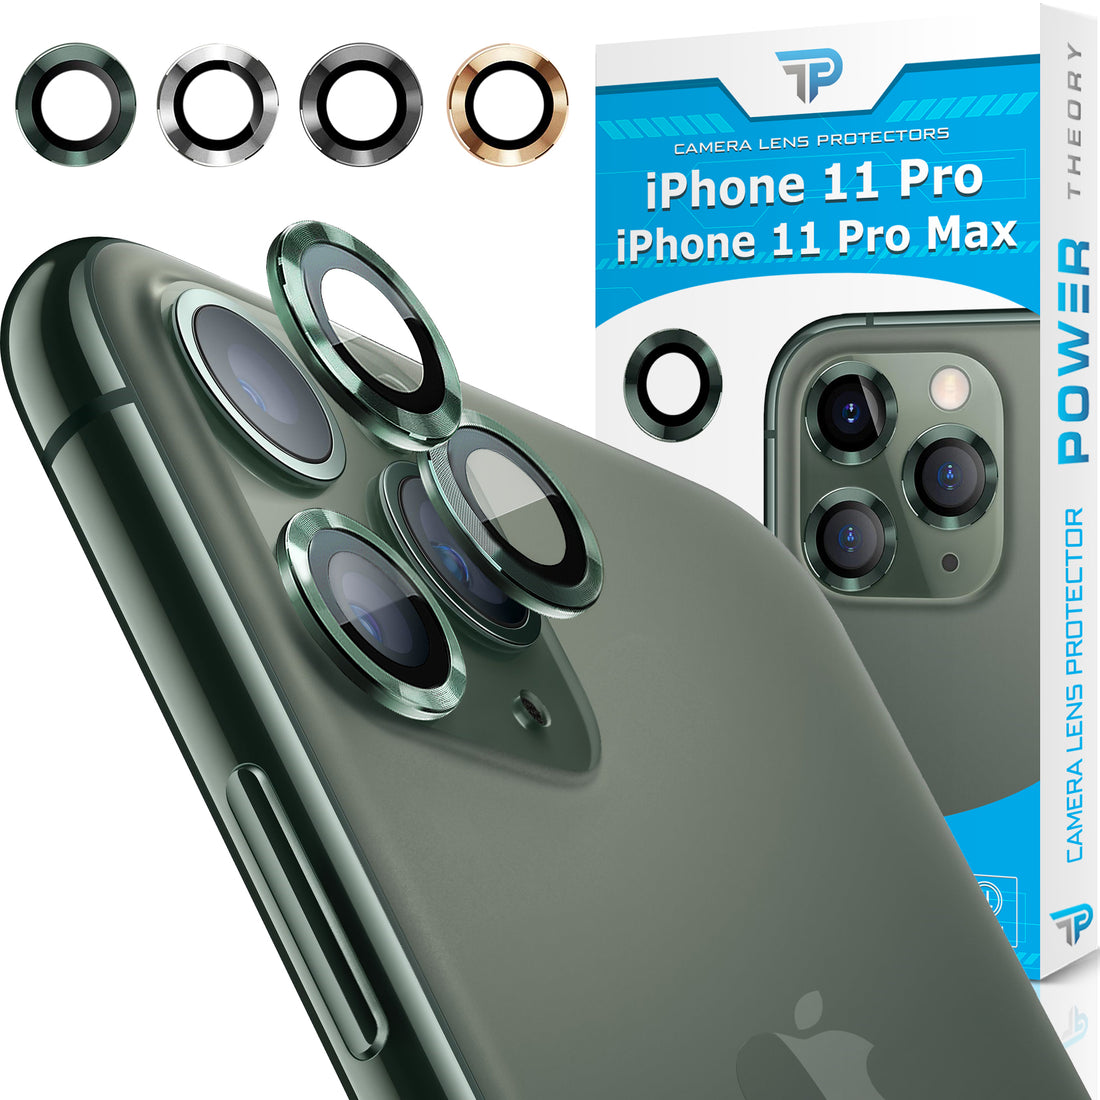 Lens Protector - iPhone 11 Pro Max / iPhone 11 Pro